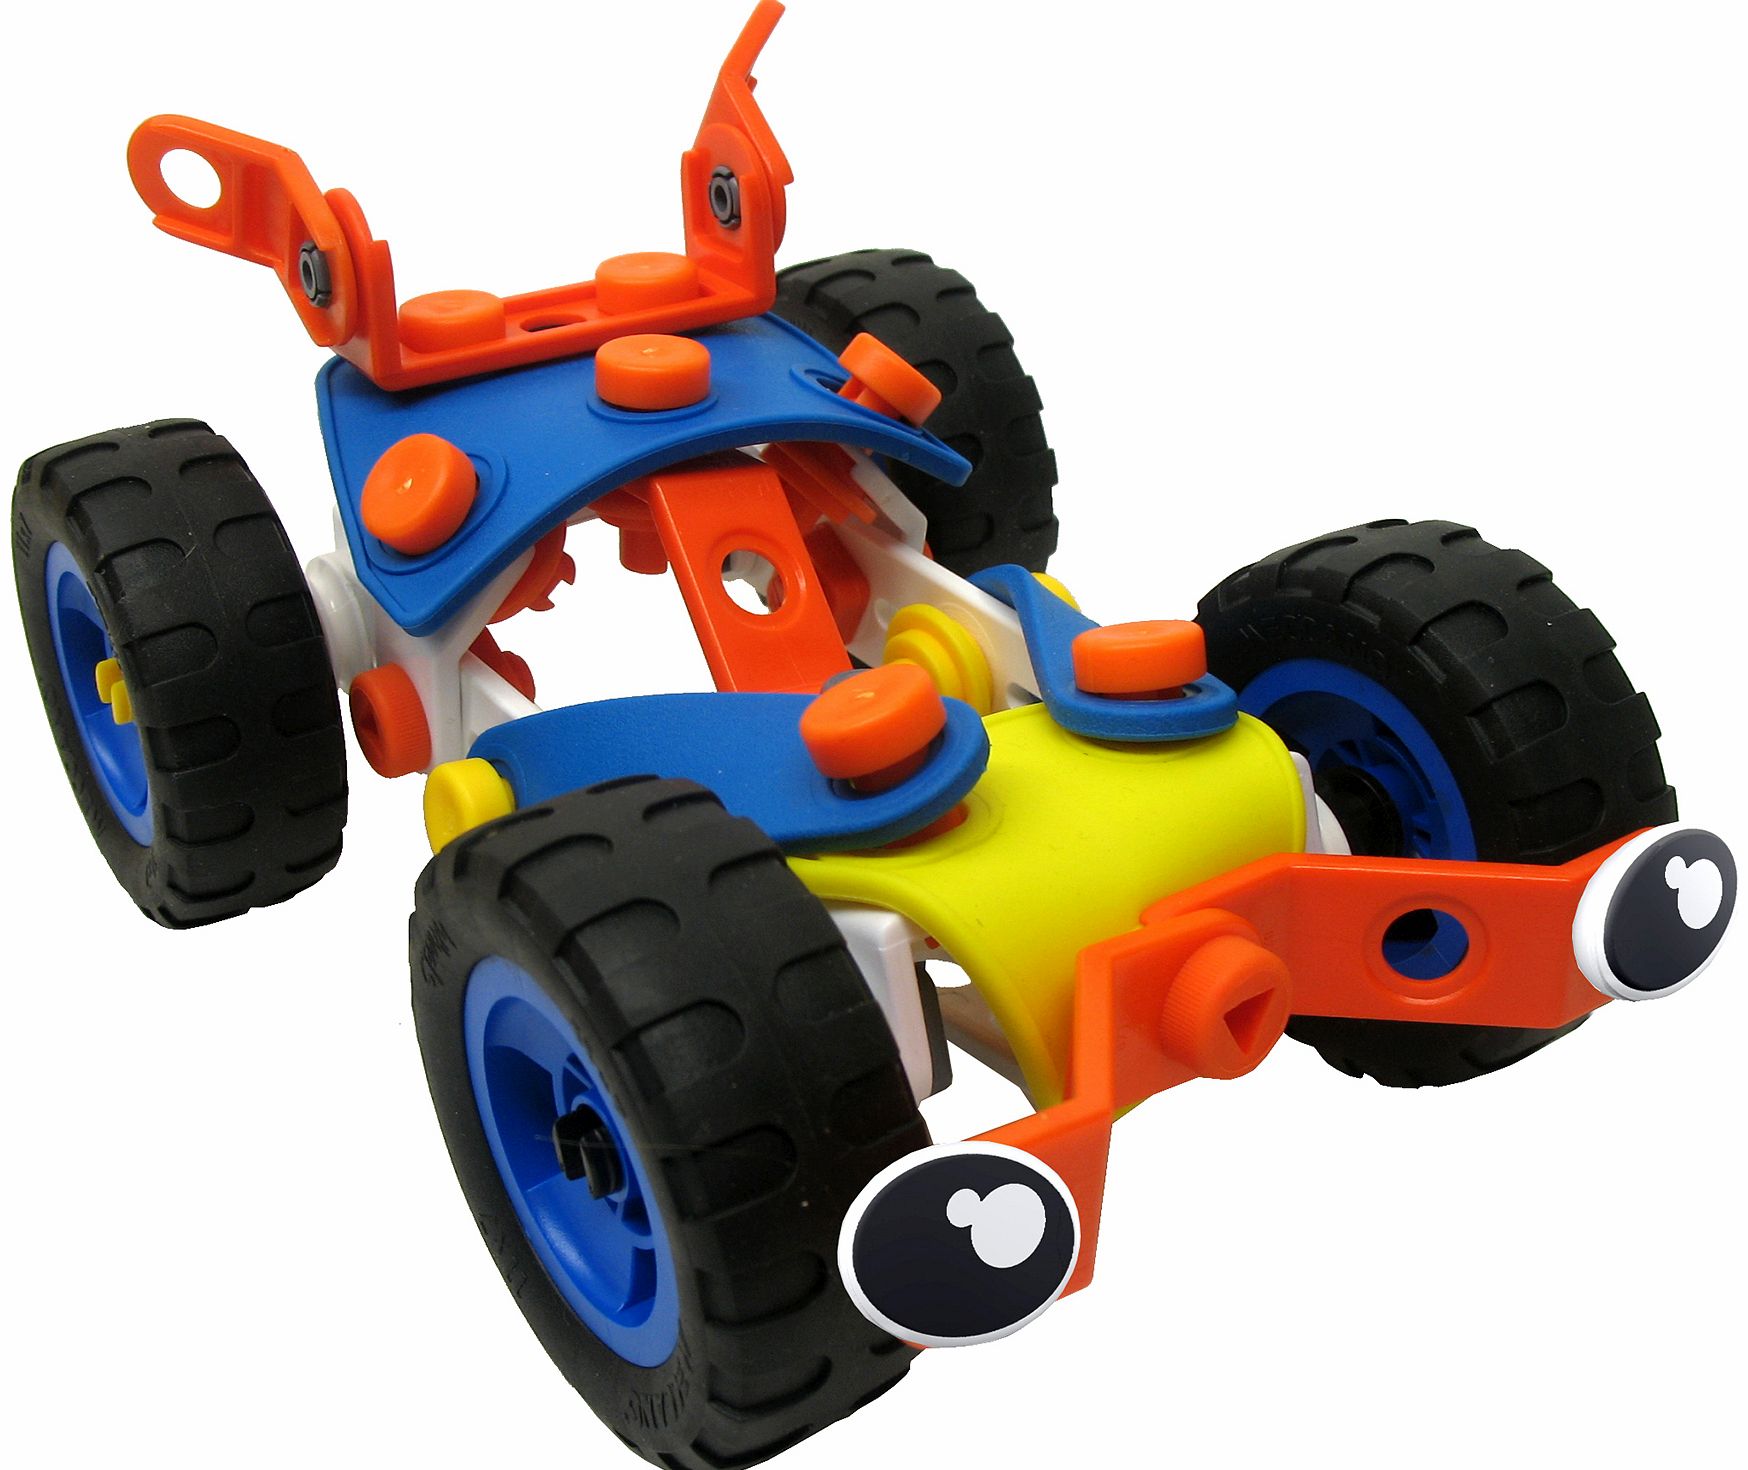 Build & Play Buggy